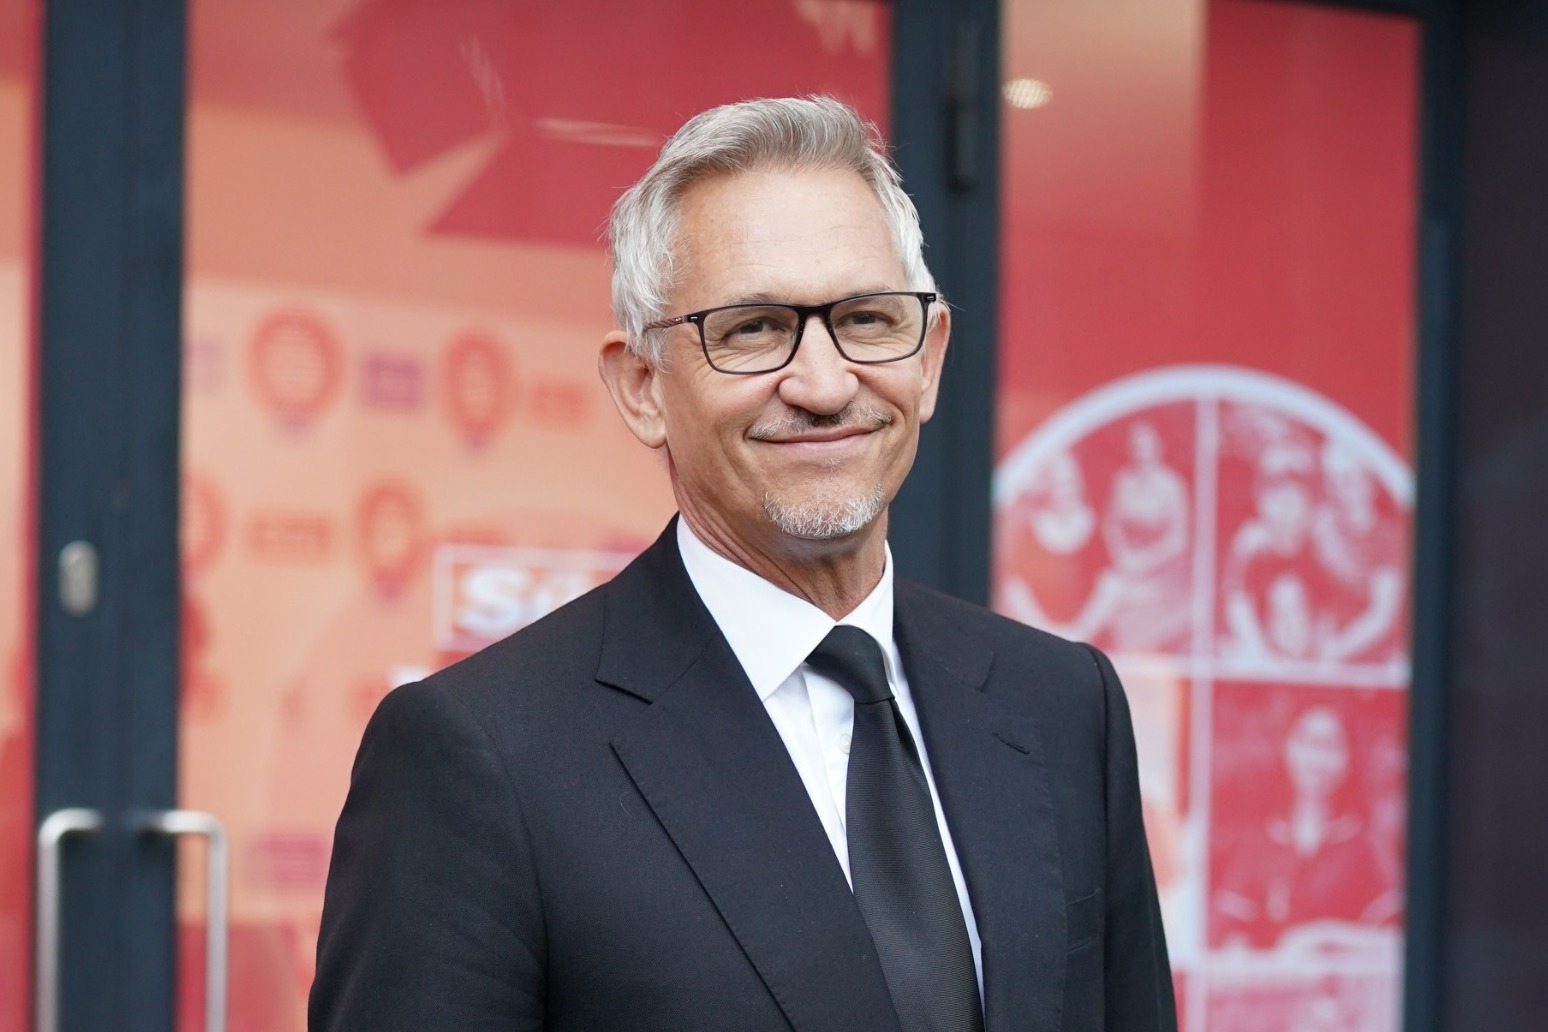 Gary Lineker becomes only on-air BBC talent to earn more than £1 million 